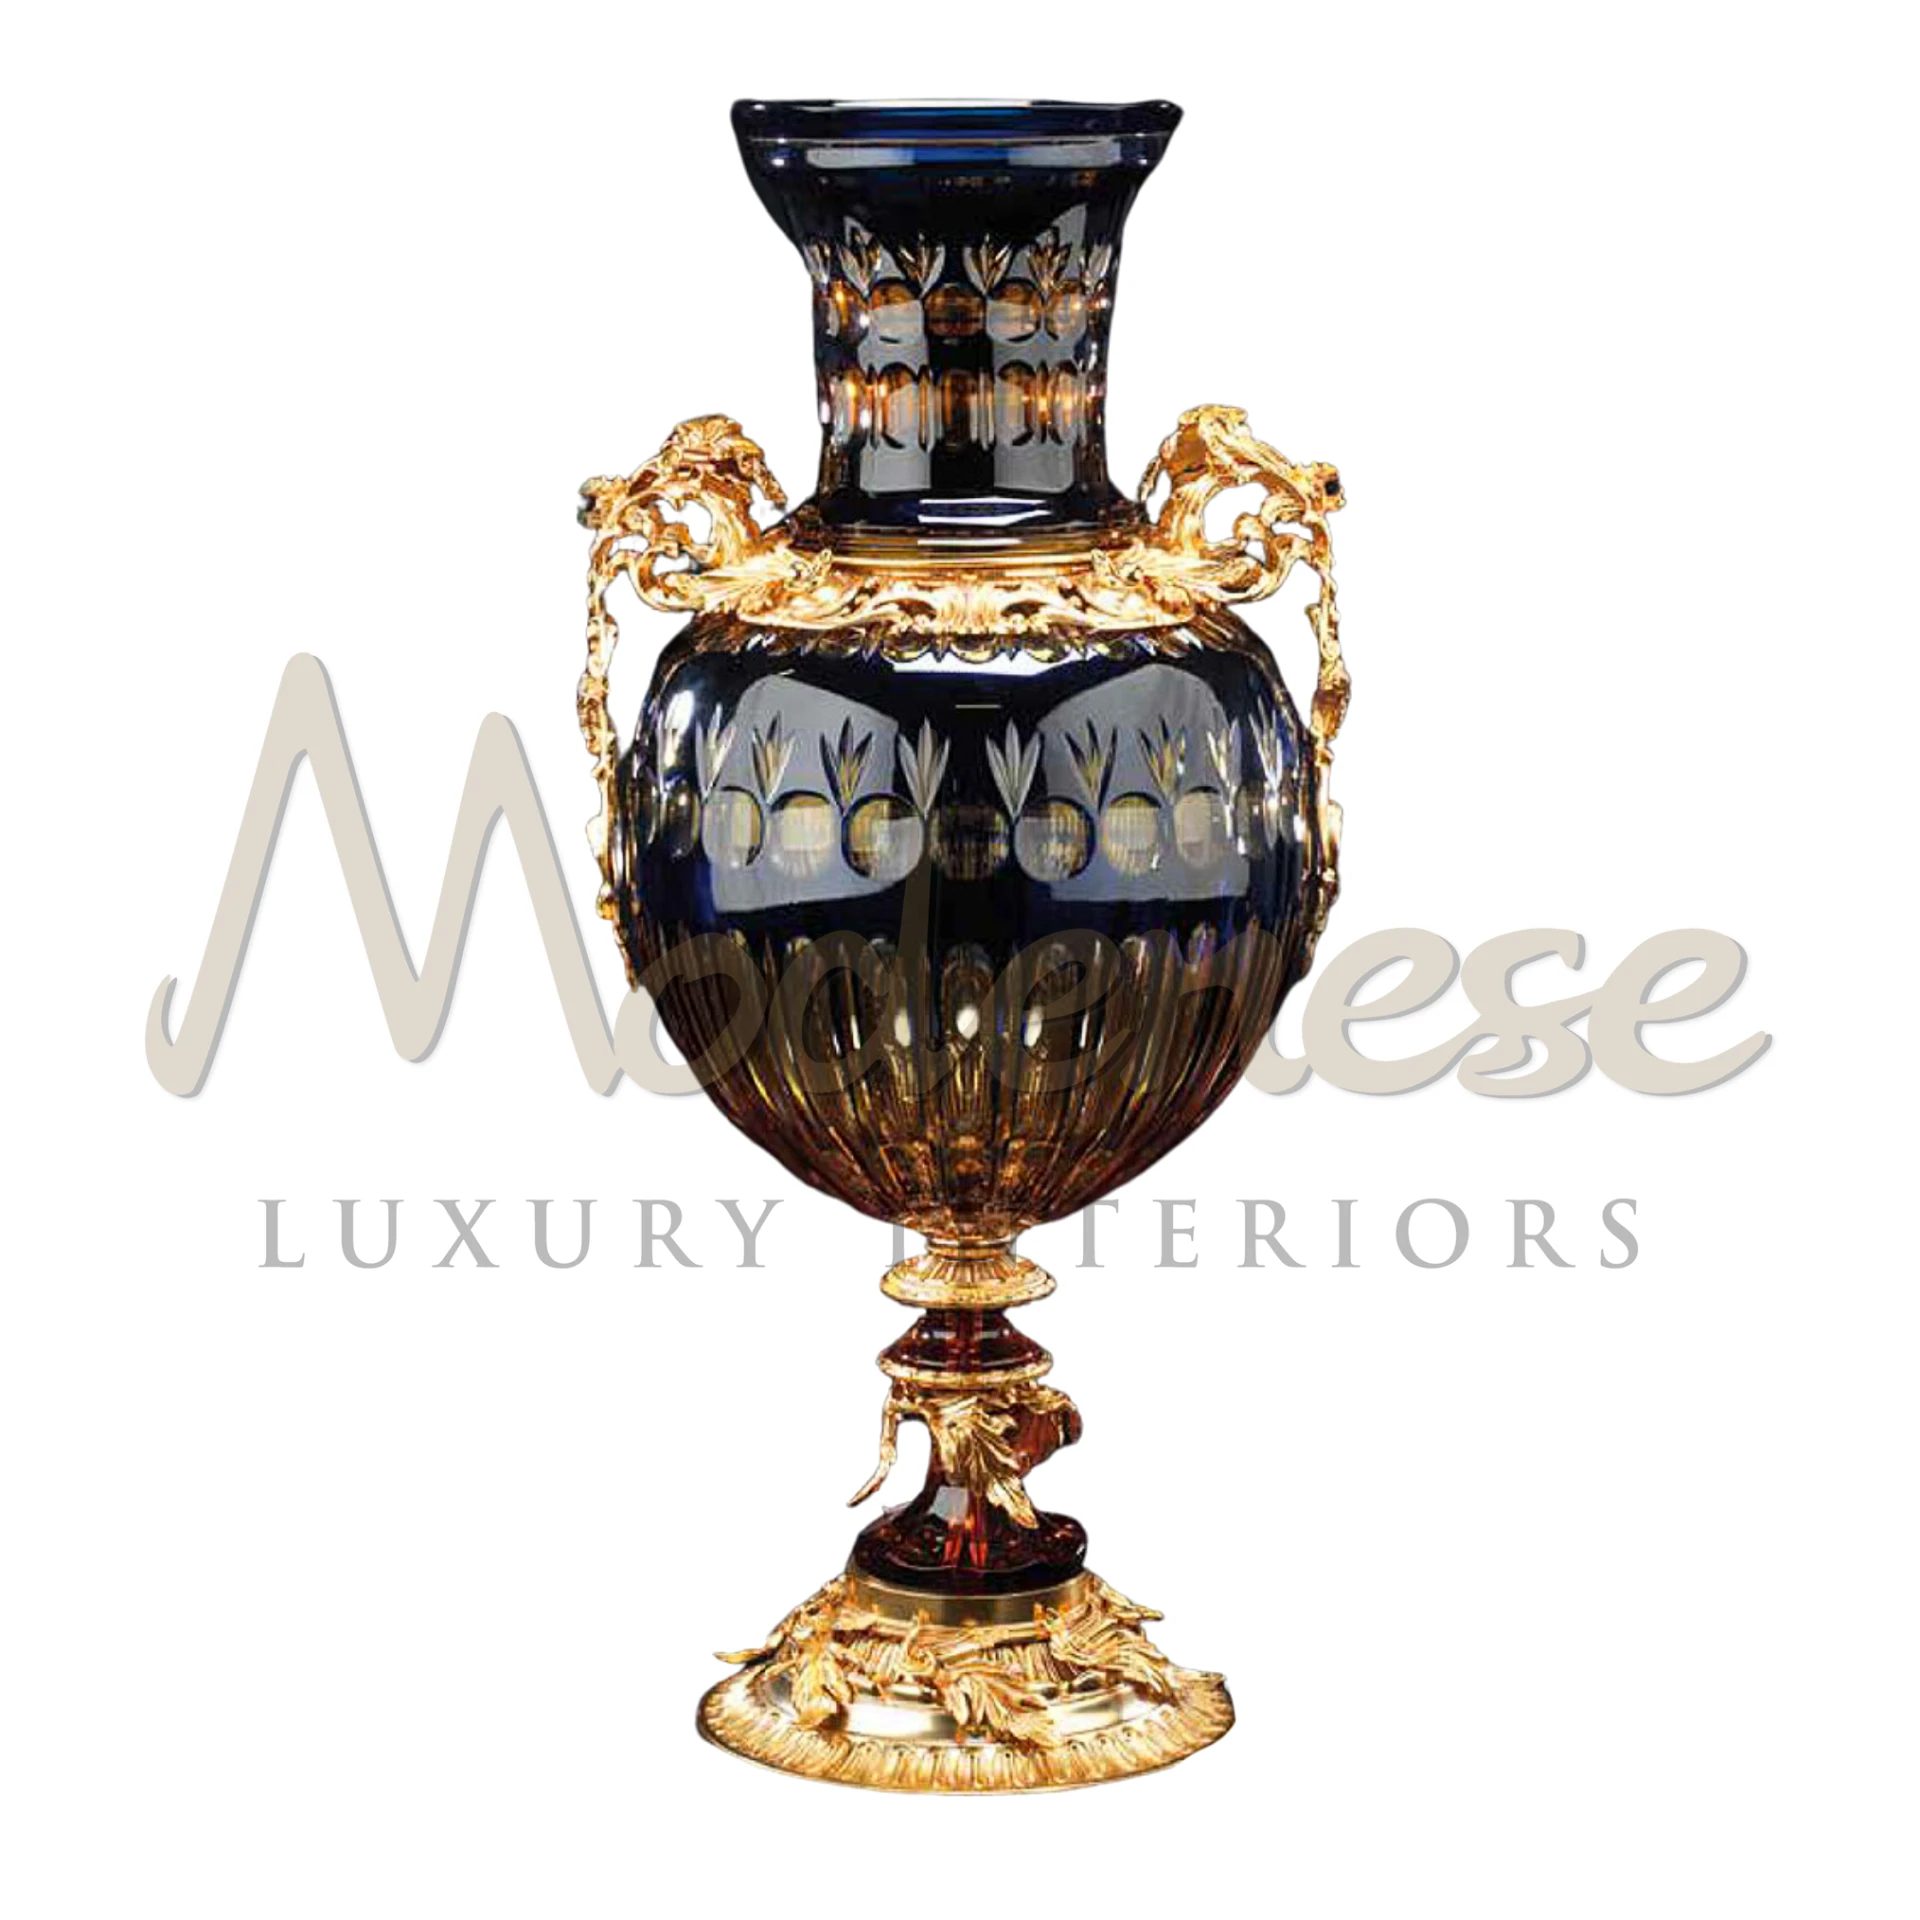 Classical Luxury Vase by Modenese, featuring intricate patterns and ornate detailing, embodies sophistication in luxury interiors.